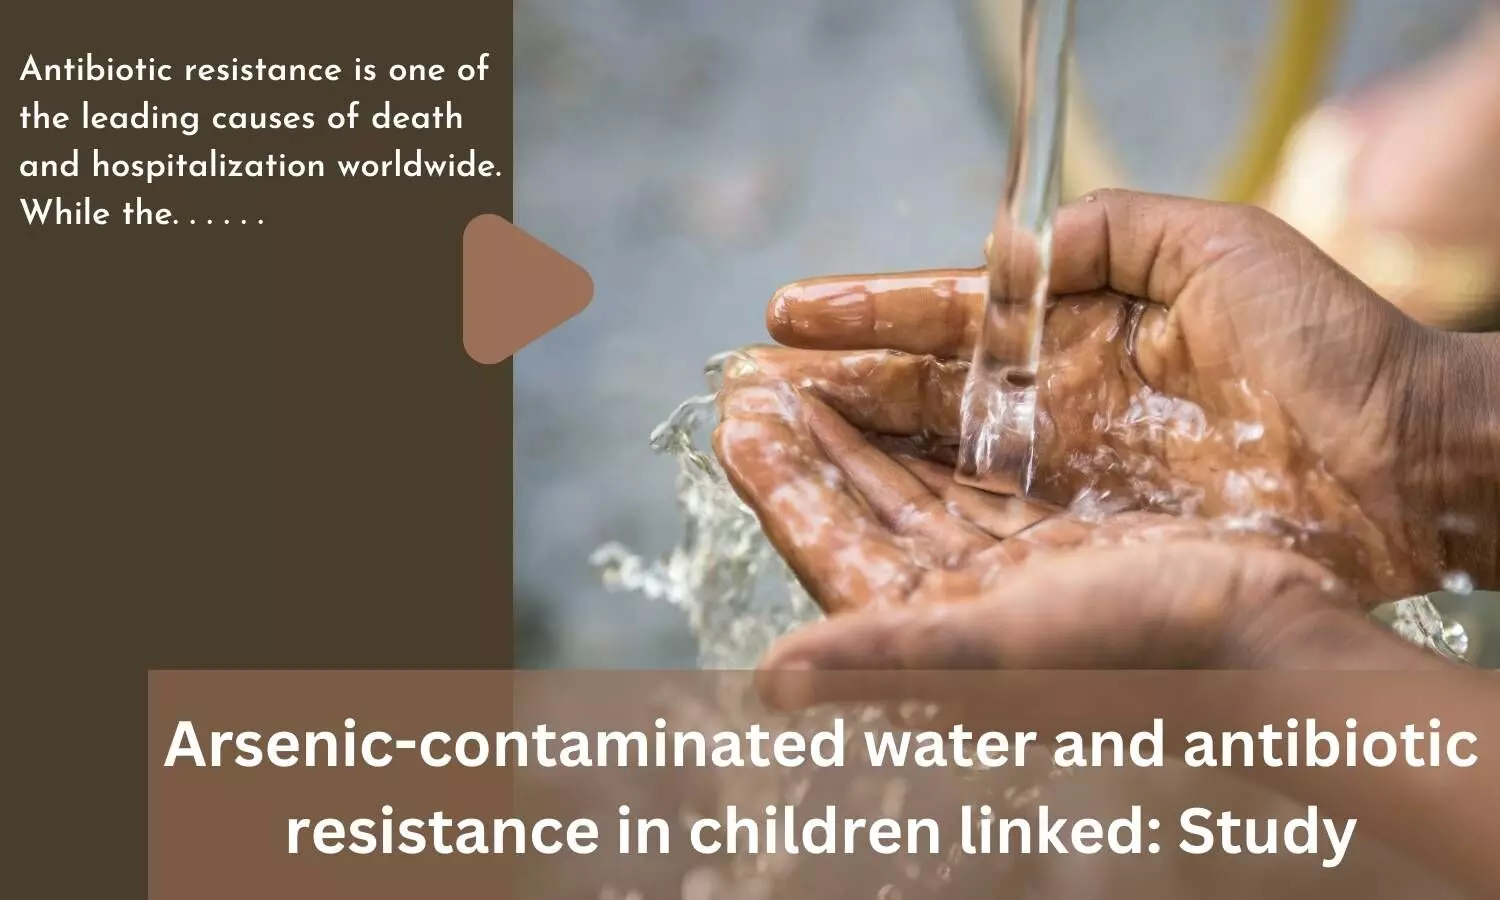 Arsenic-contaminated water and antibiotic resistance in children linked: Study